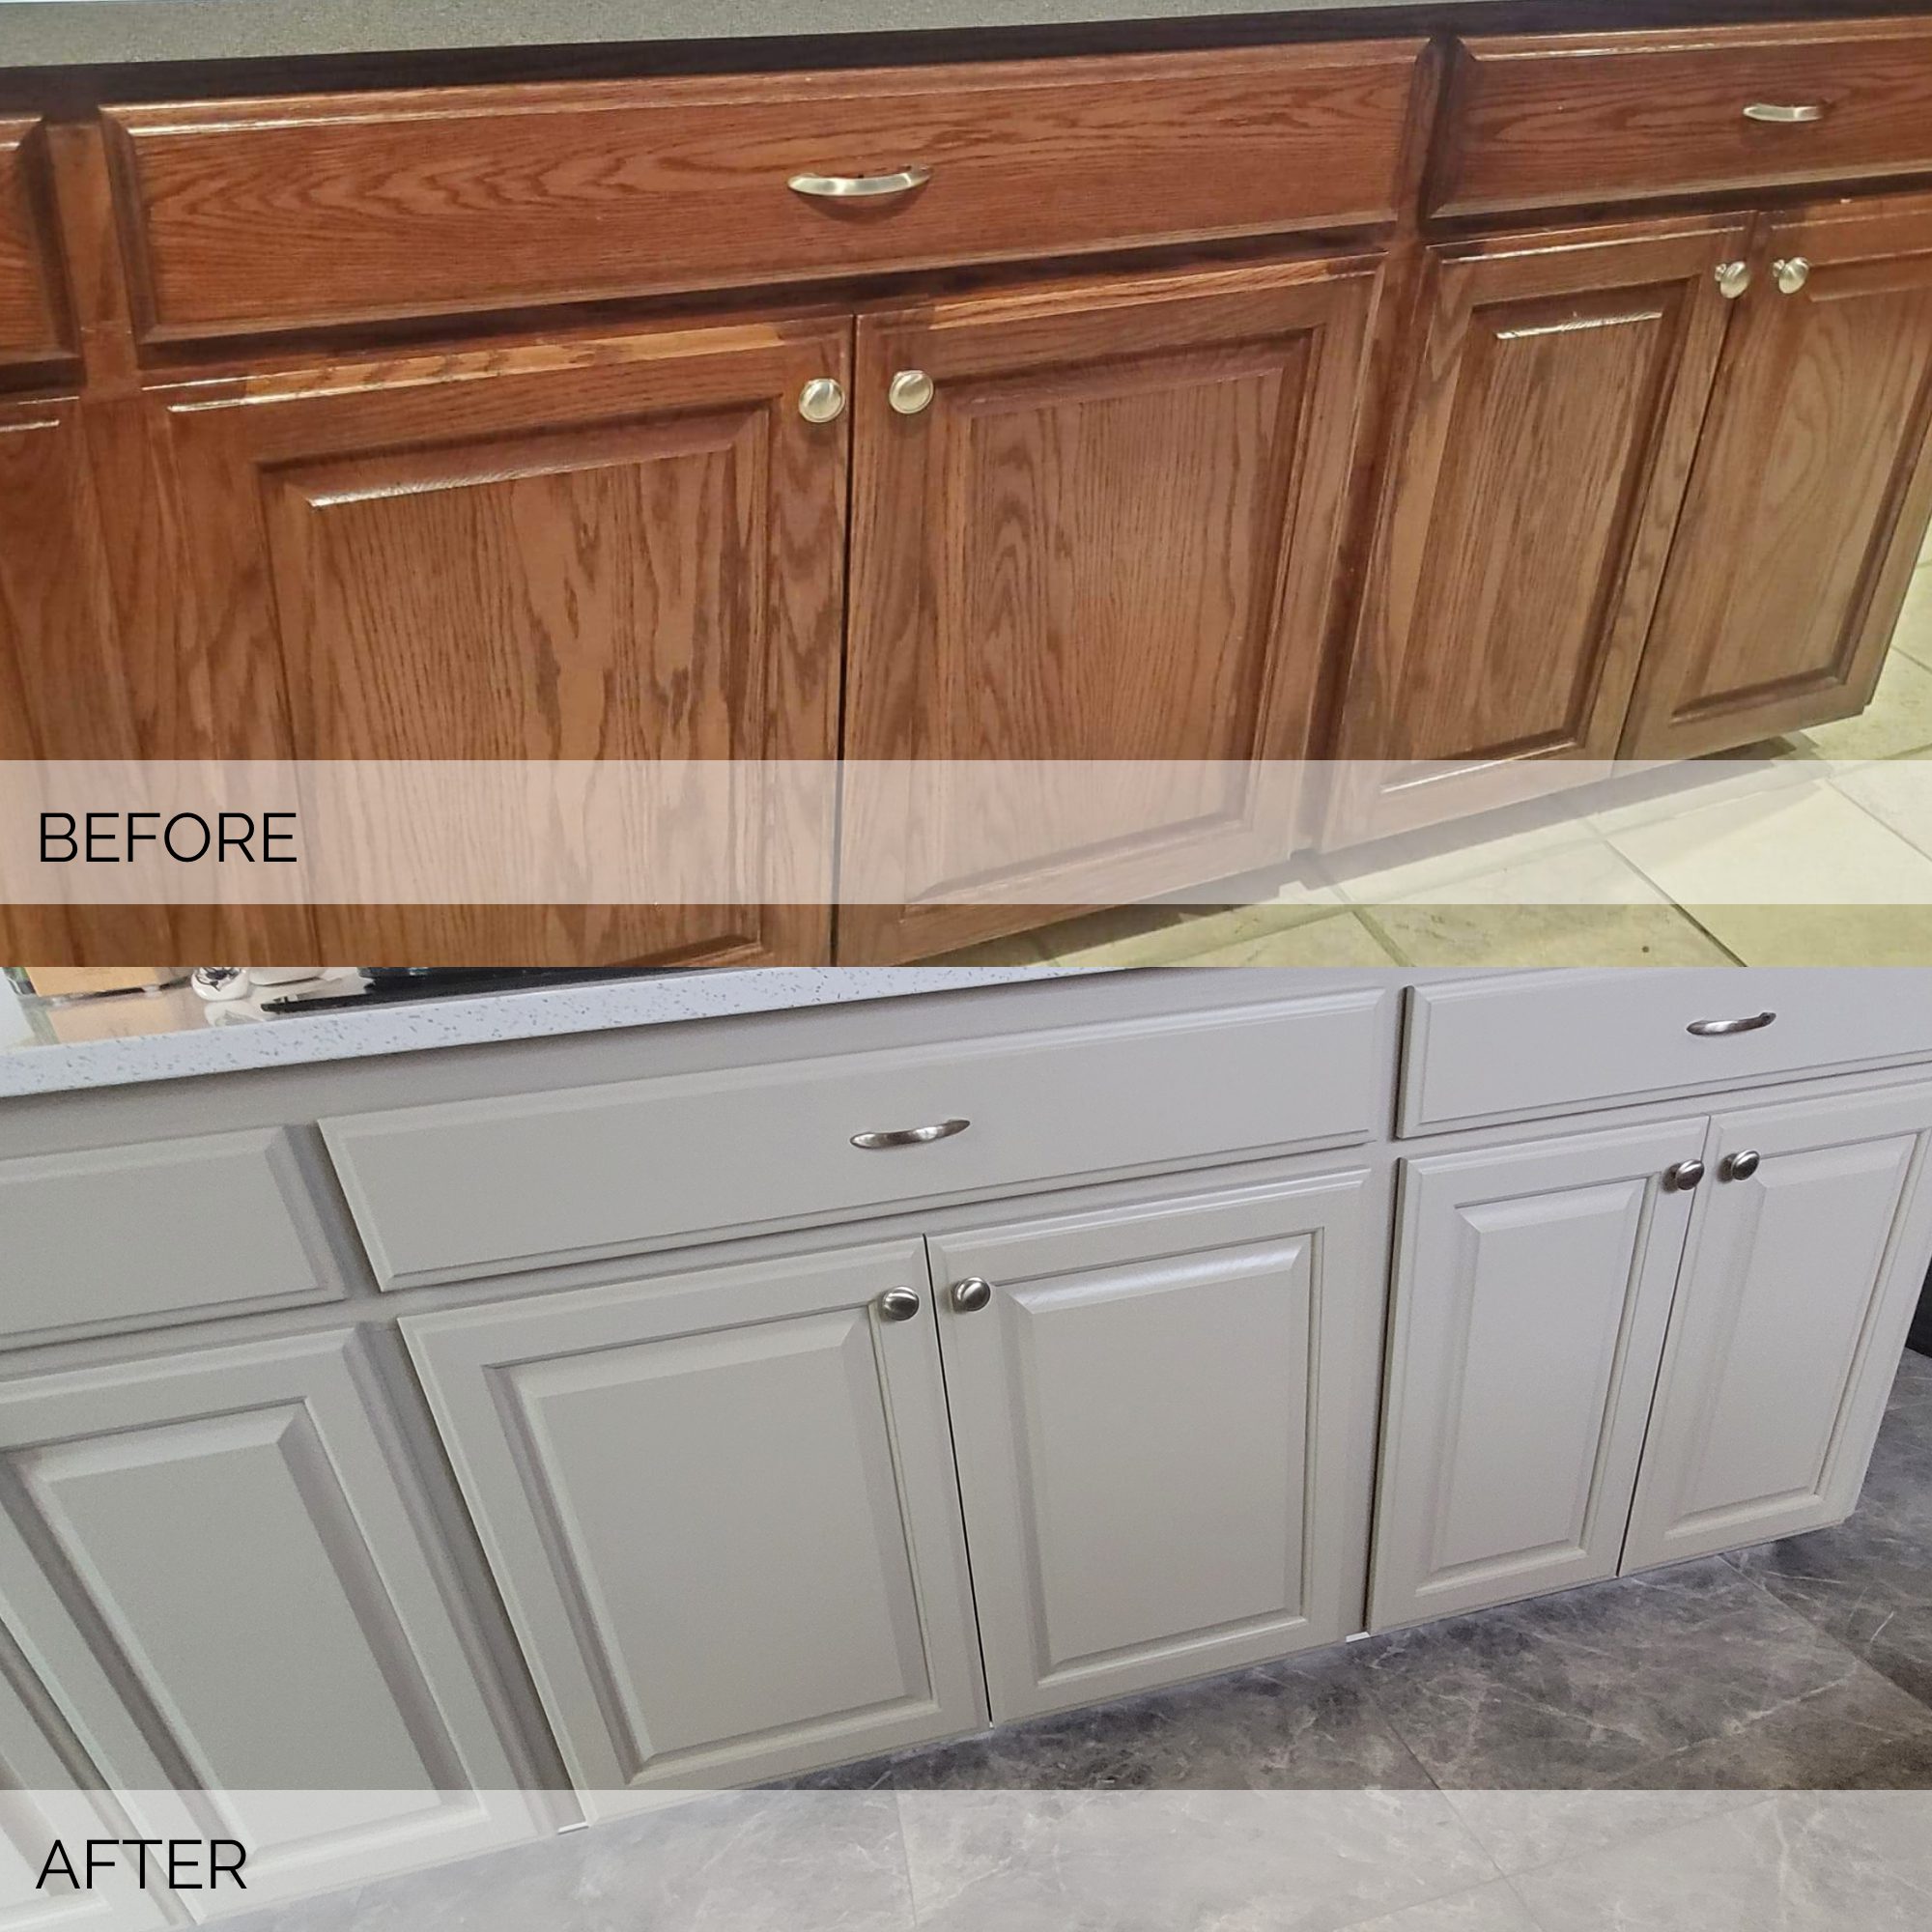 Residential Kitchen Remodel, Before/After Kitchen countertops